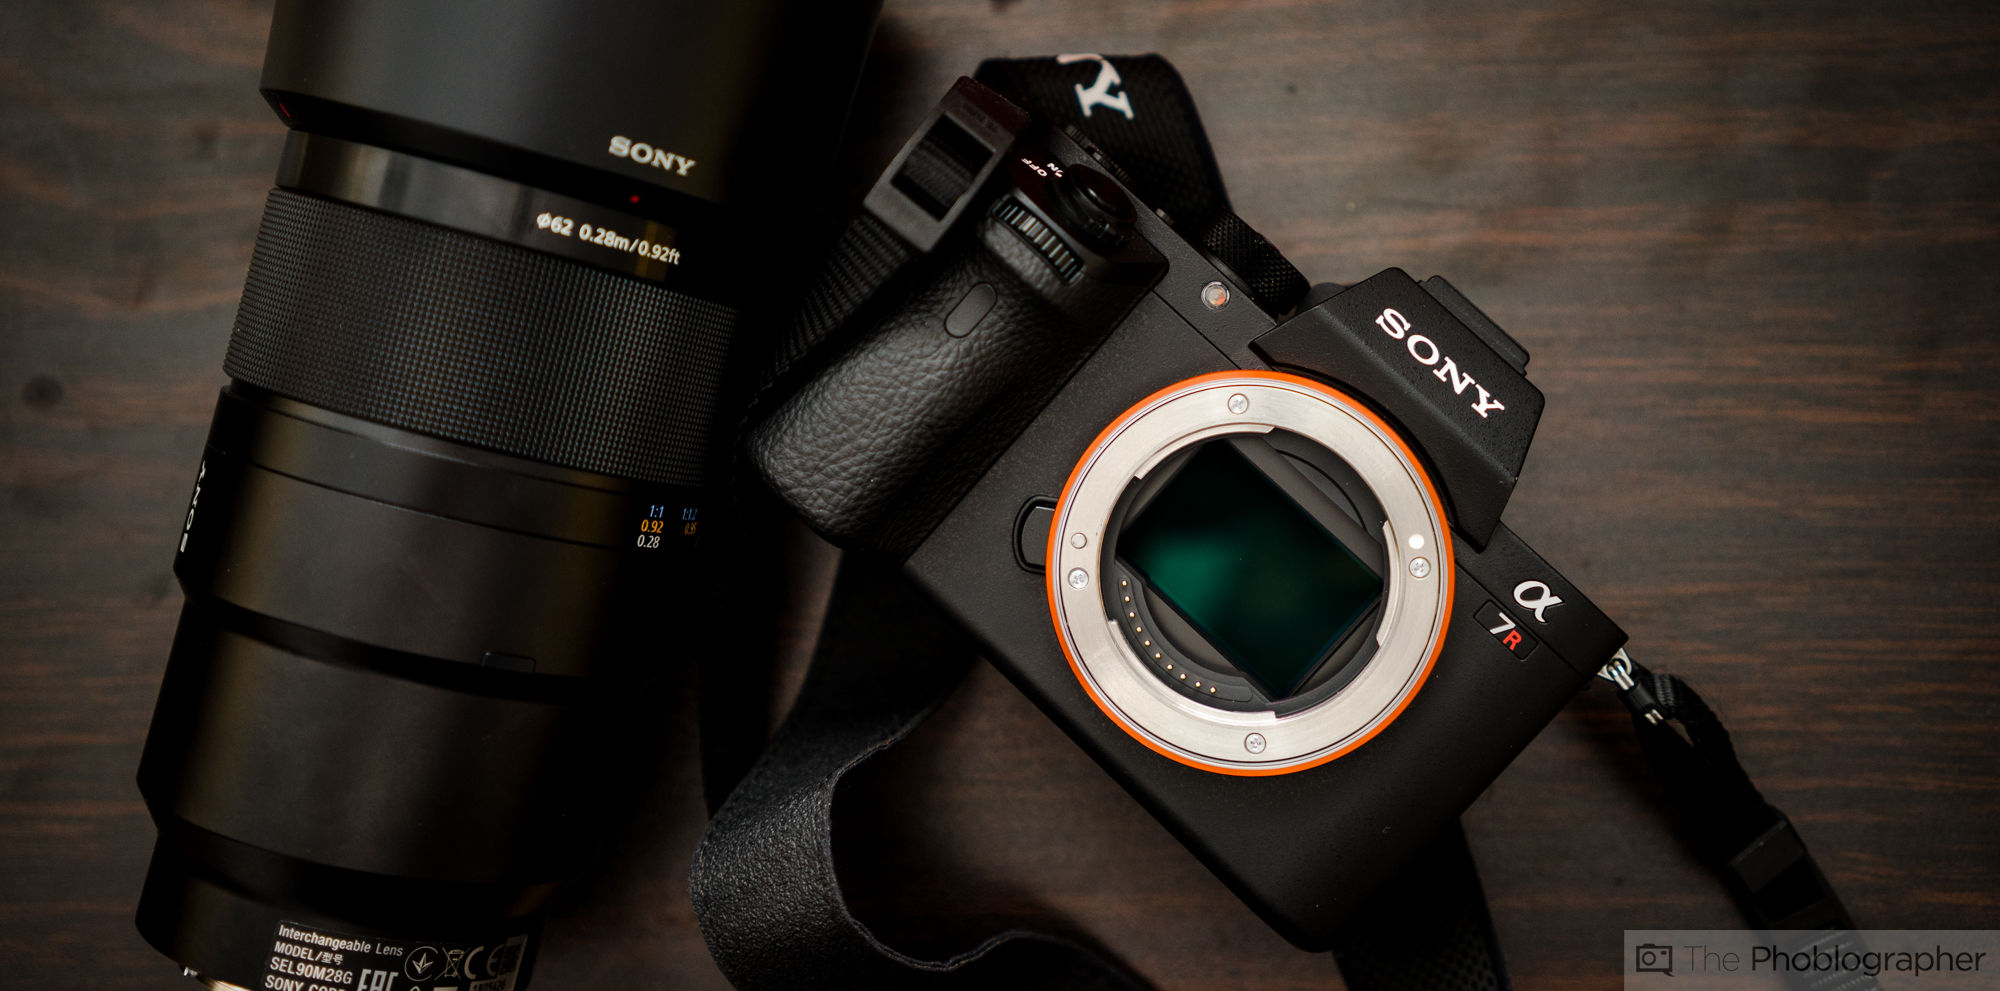 Chris Gampat The Phoblographer Sony A7r Mk II product images review (3 of 3)ISO 4001-50 sec at f - 2.8